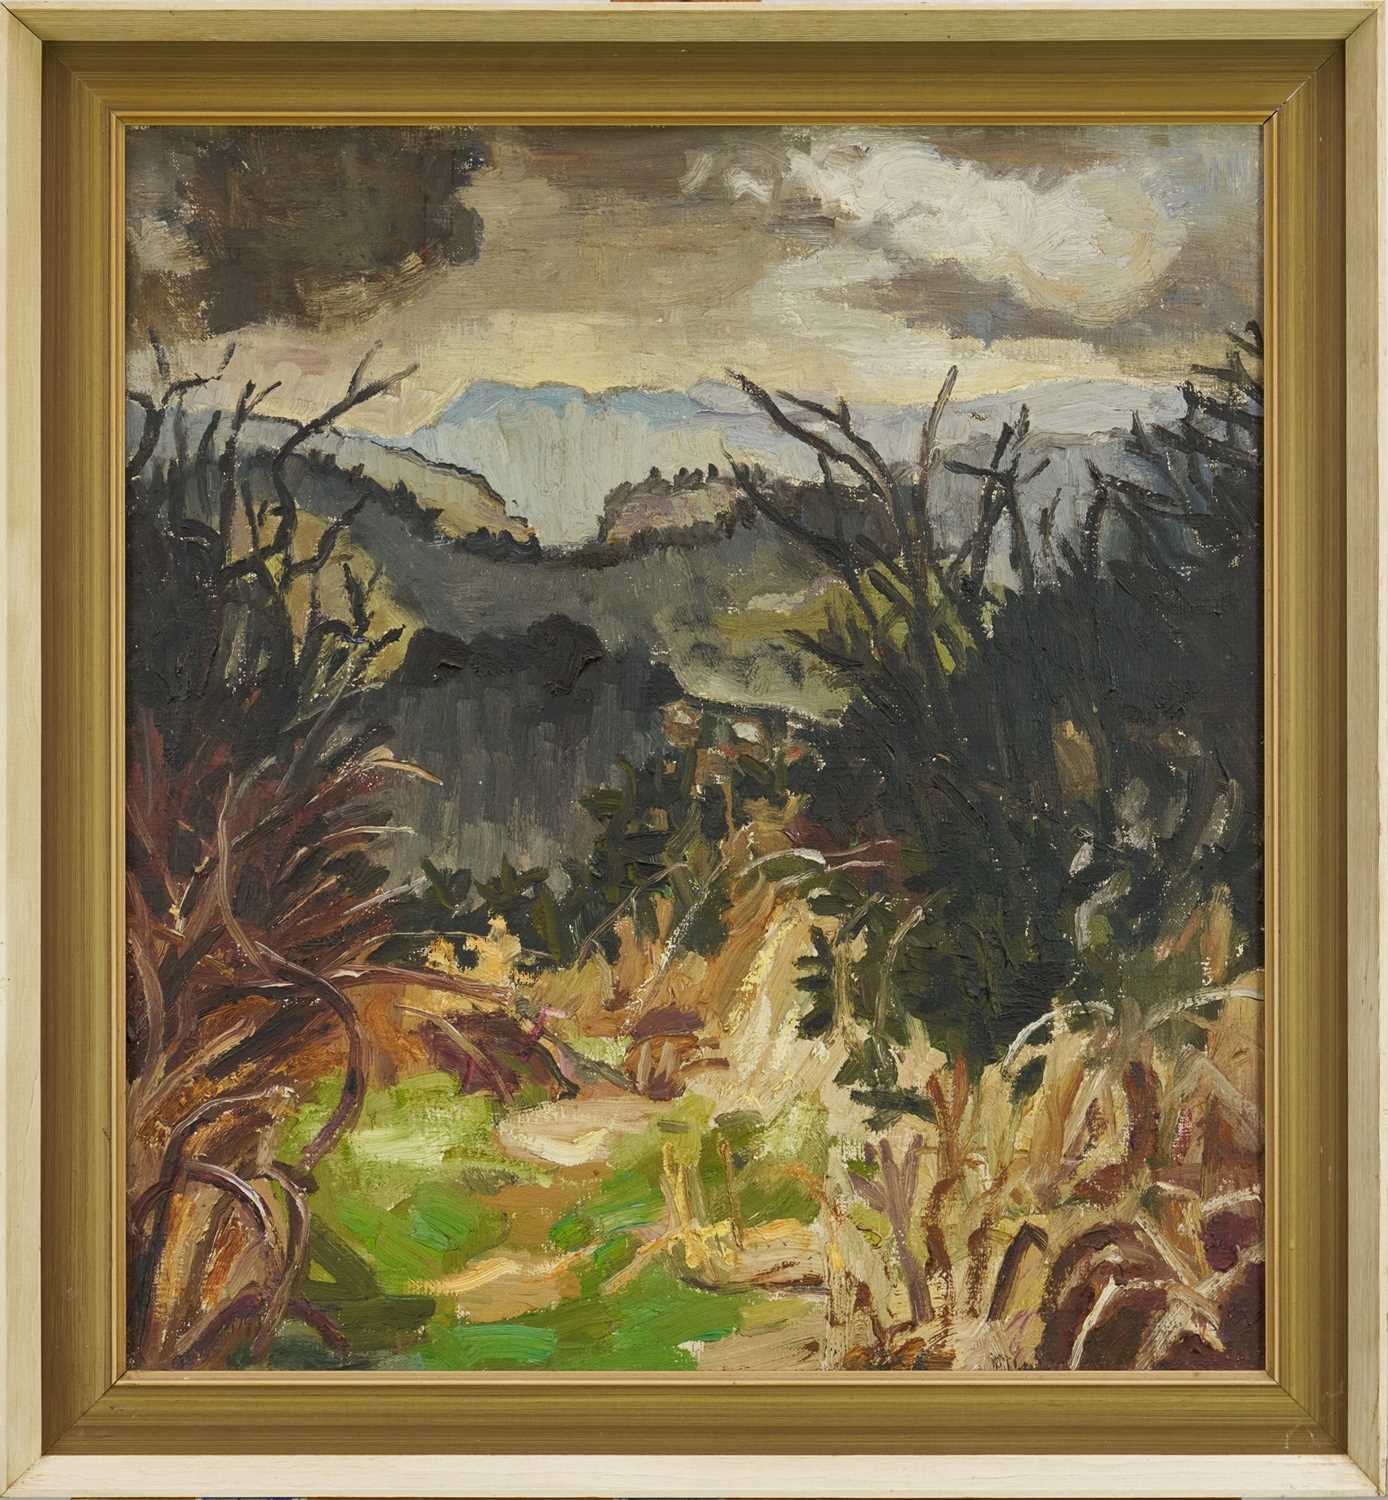 *Lucy Harwood (1893-1972) oil on canvas - Extensive Landscape